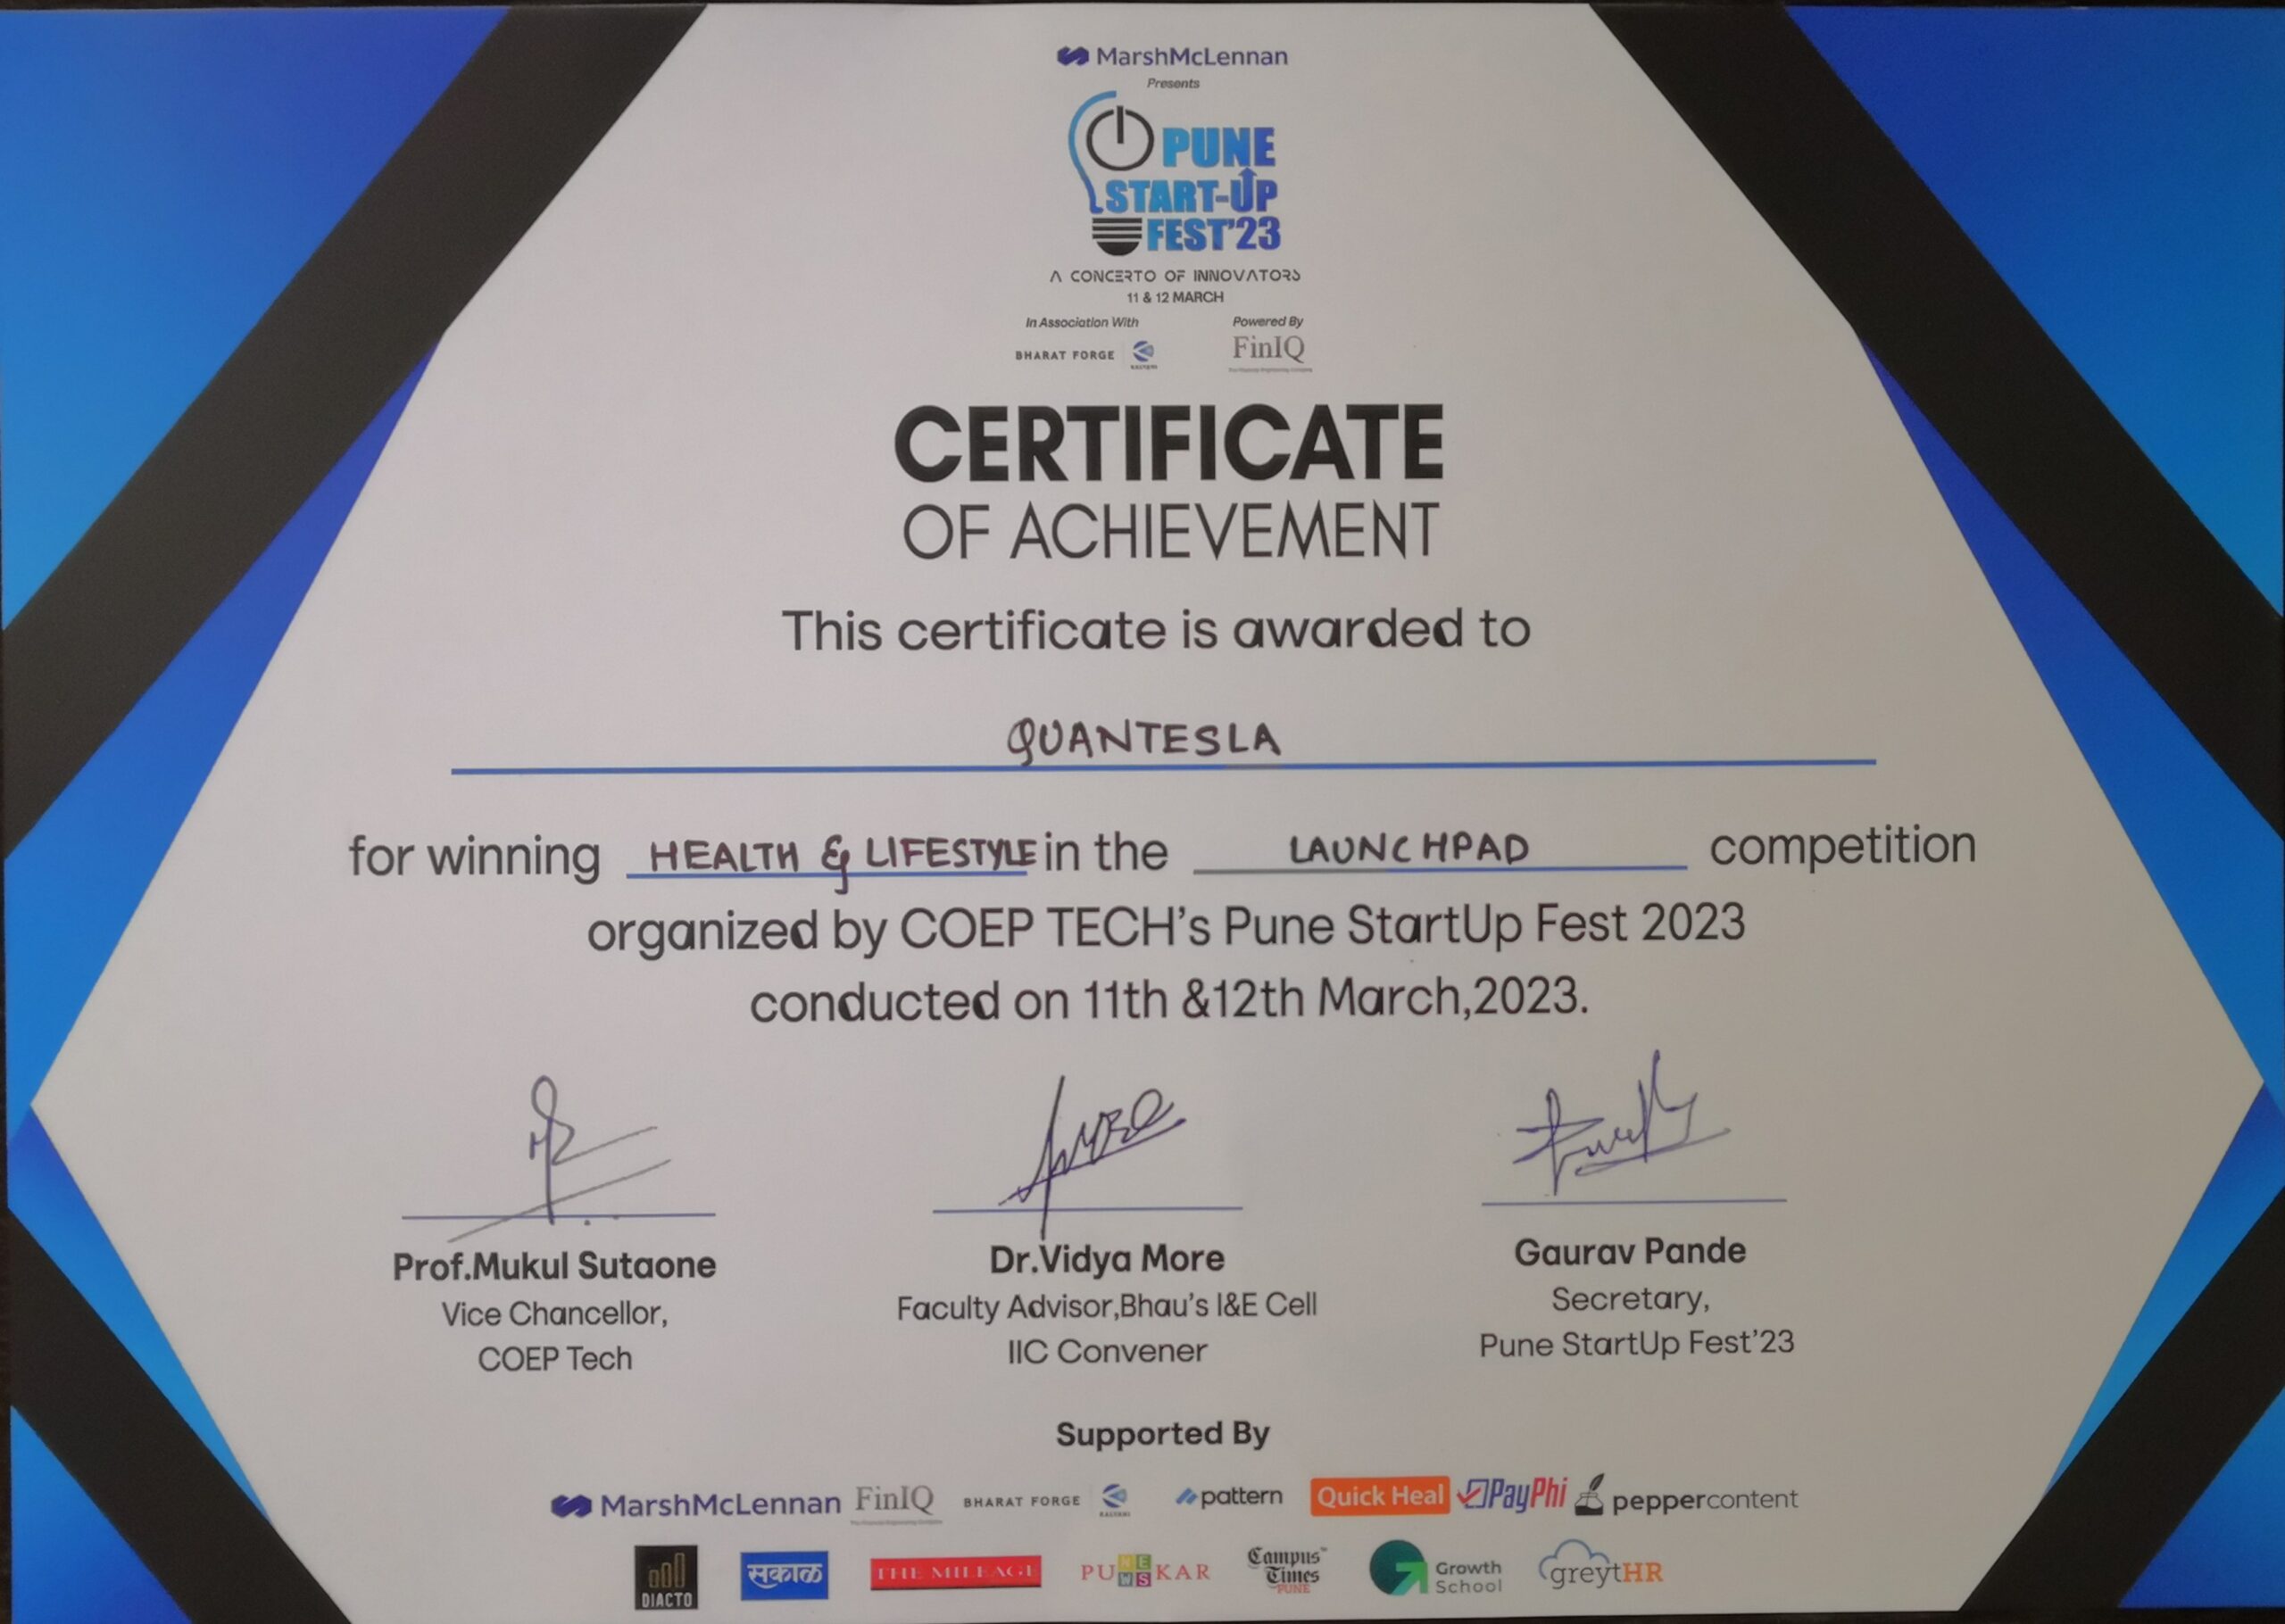 Quantesla's award certificate from COEP Pune StartUp Fest 2023 for winning a healthcare innovation challenge